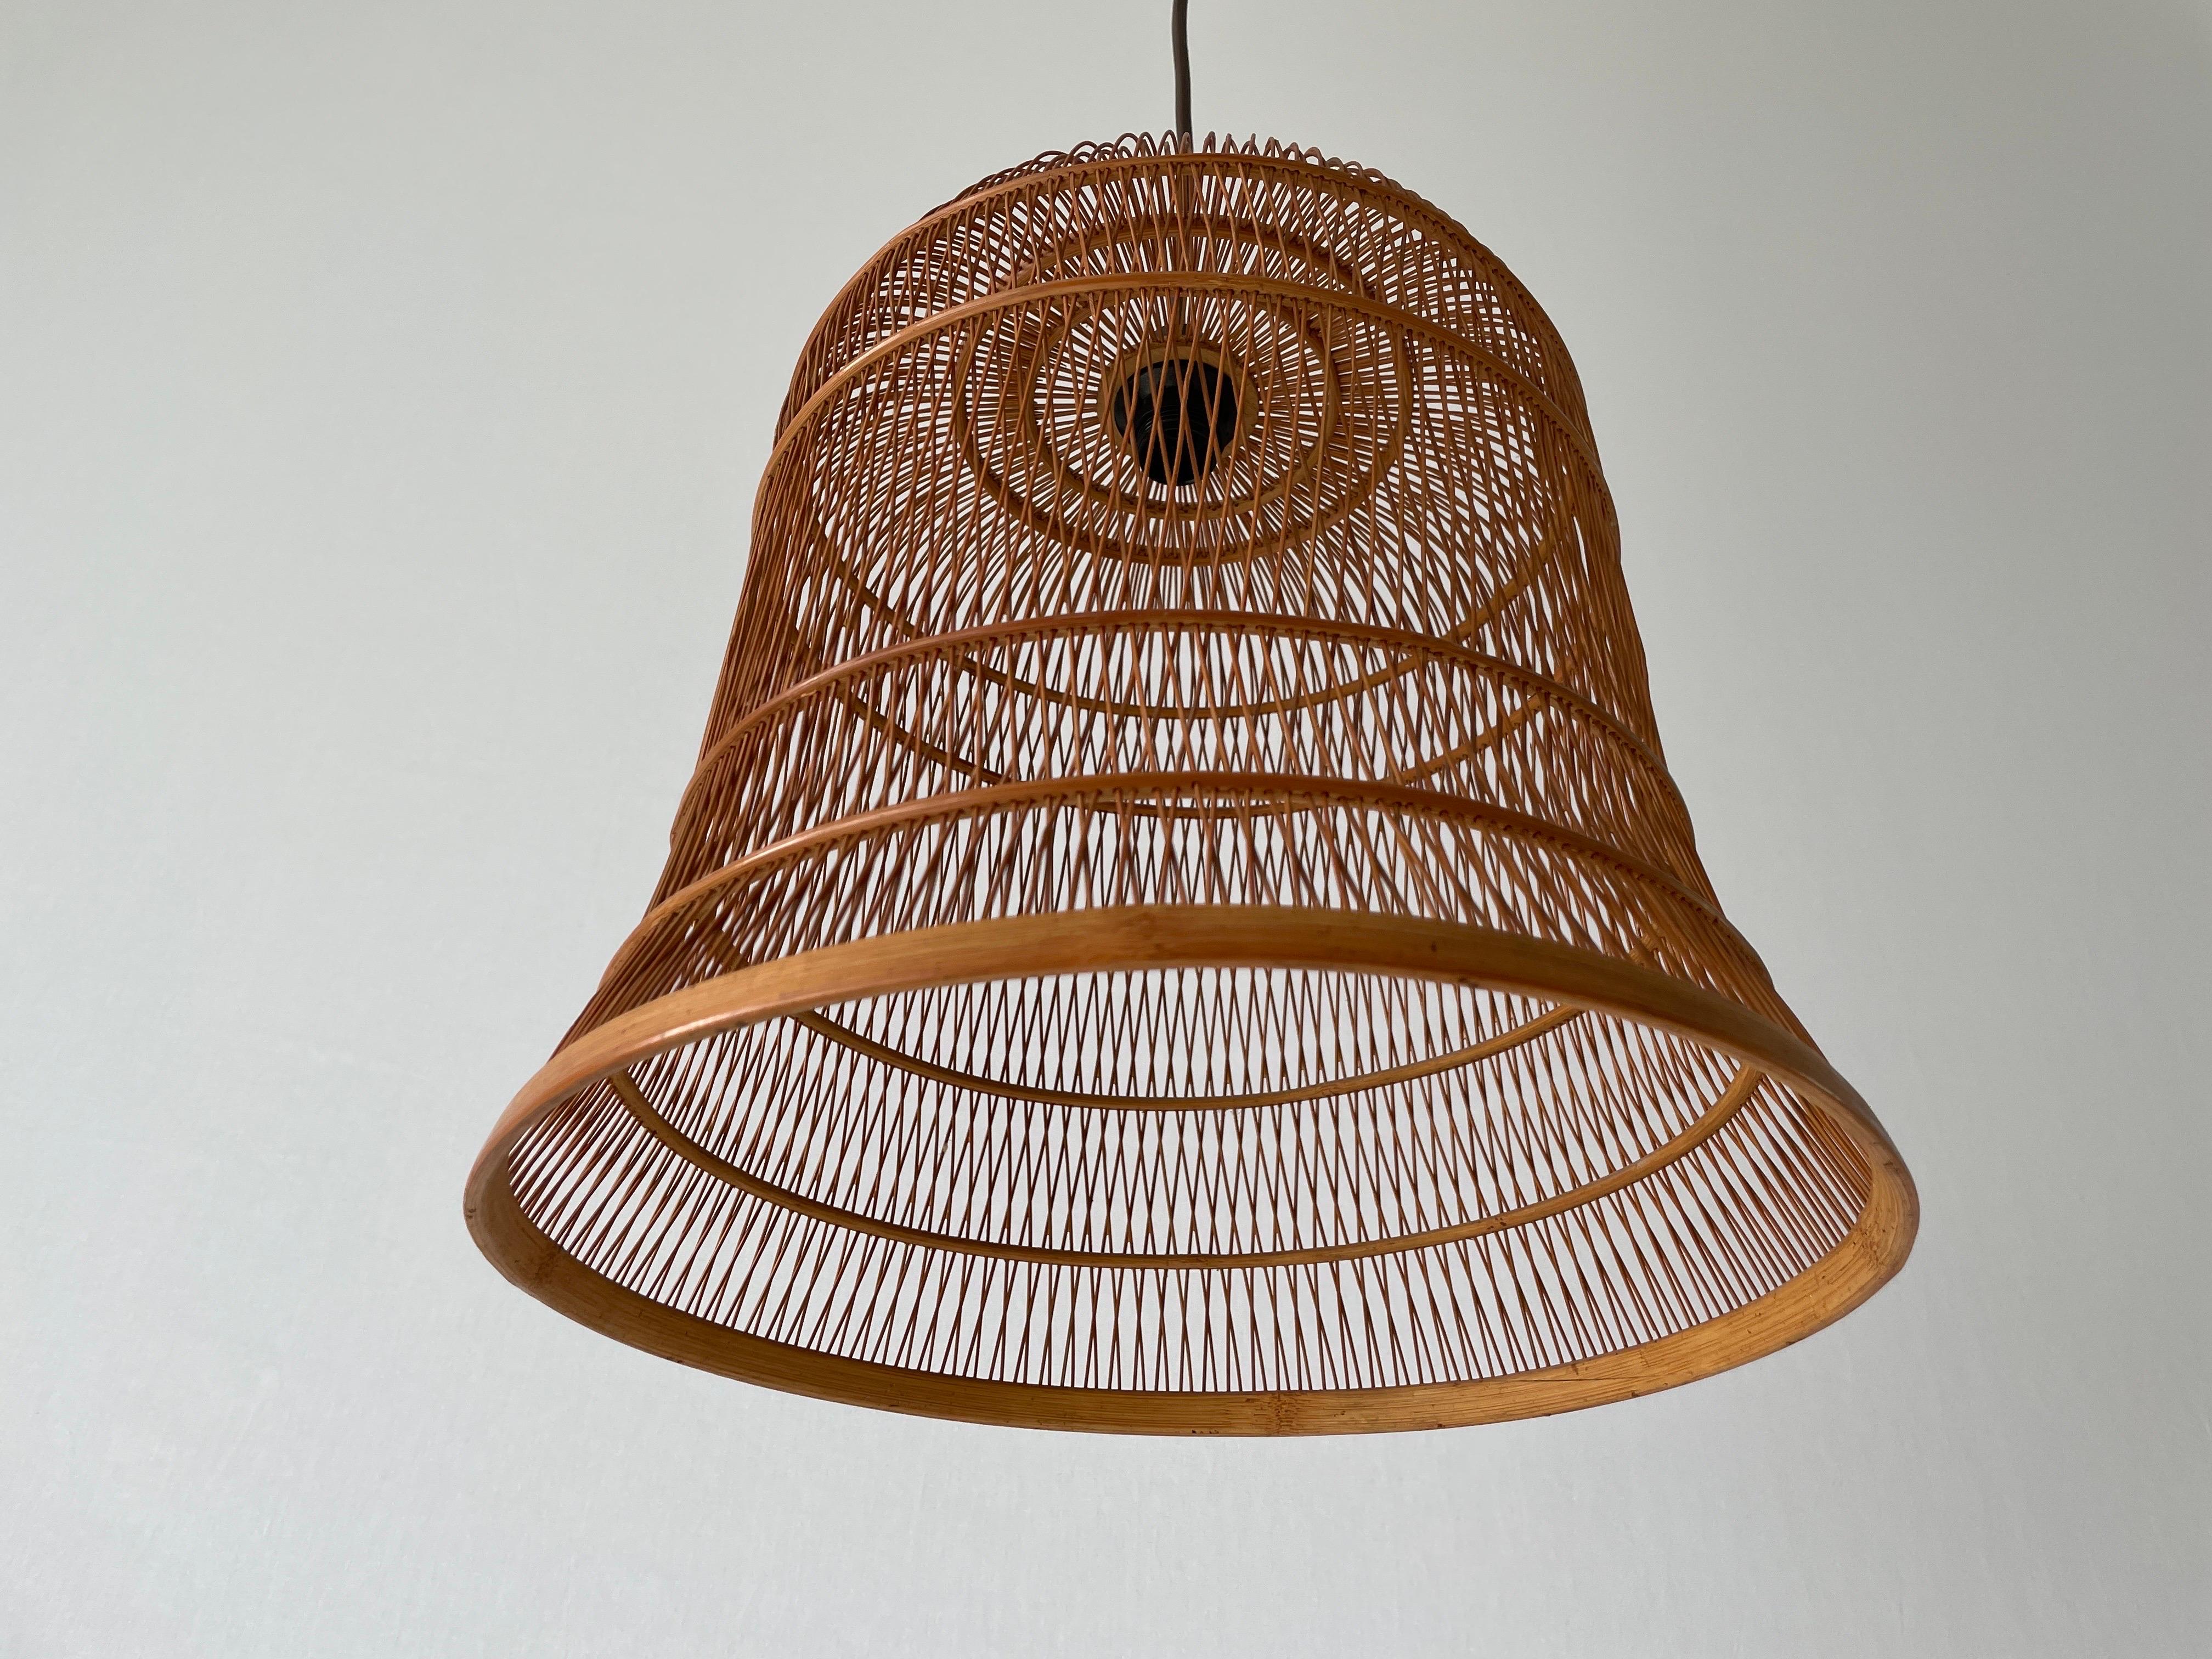 Unique Danish Cage Design Wood Pendant Lamp, 1960s, Denmark

Lampshade is in very good vintage condition.

This lamp works with E14 light bulb 
Wired and suitable to use with 220V and 110V for all countries.

Measurements:
Height: 110 cm (can be